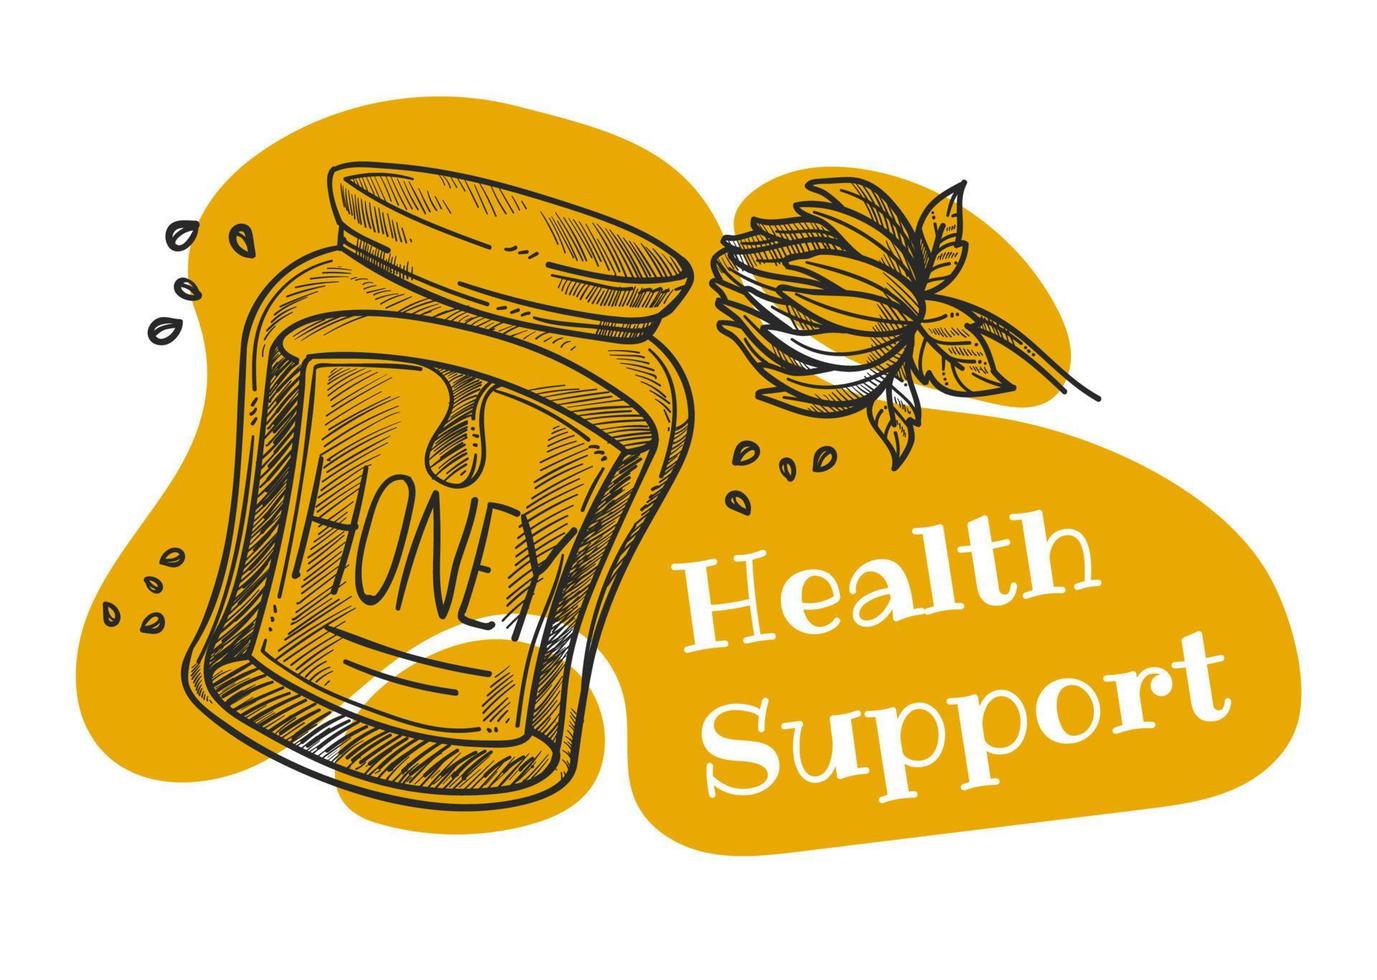 Health support by eating honey, natural product vector